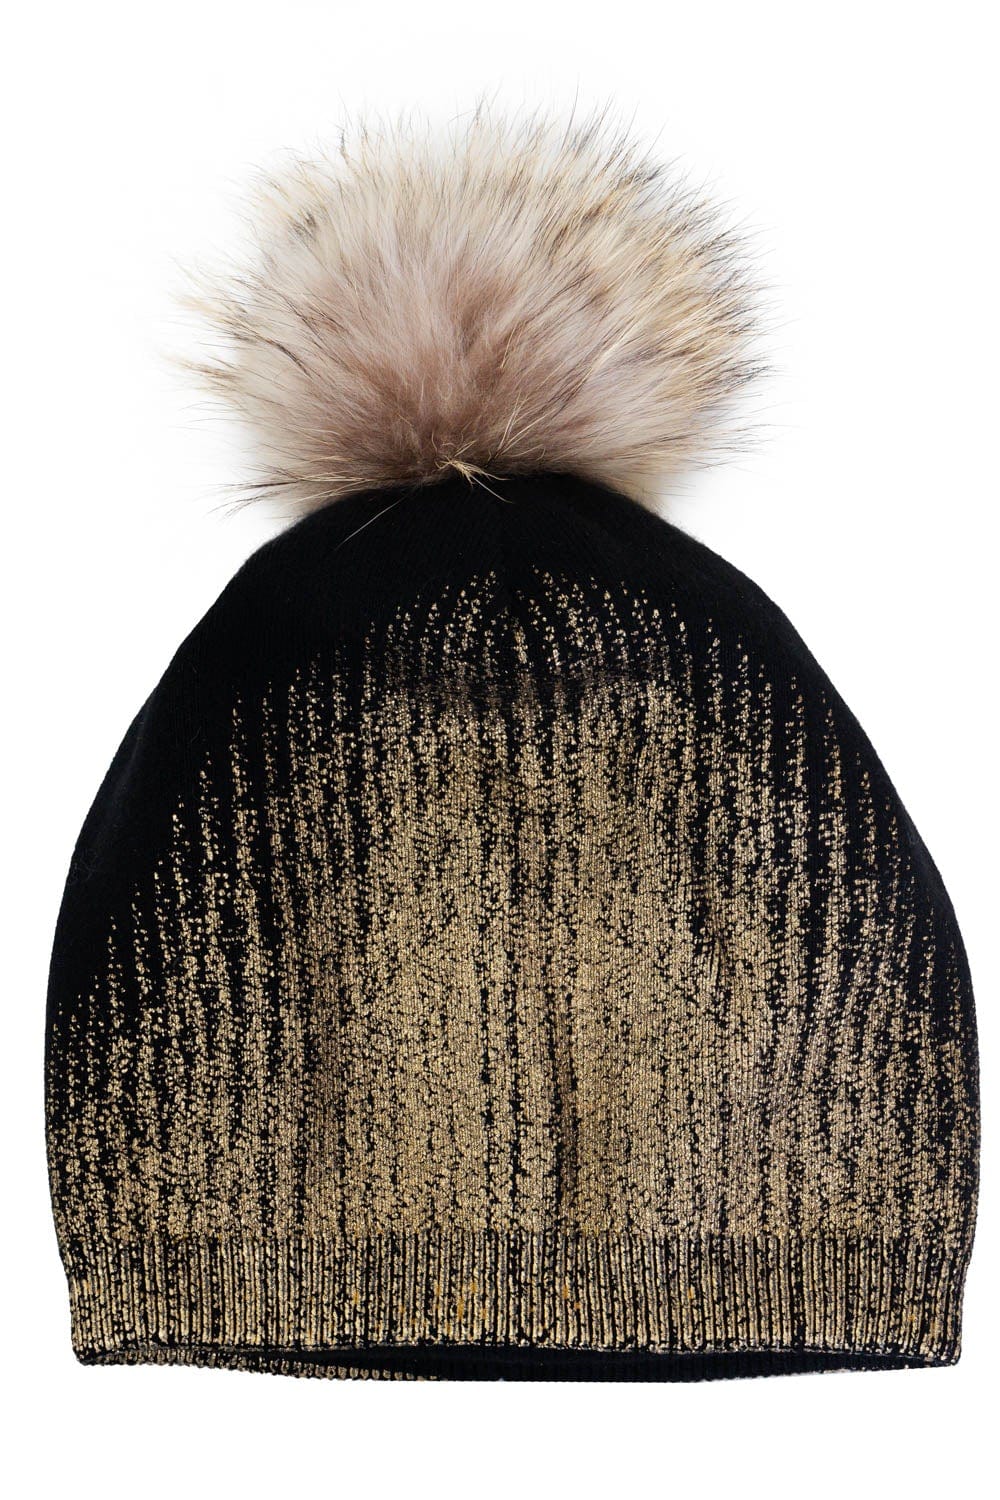 Rebecca & Rifka Metallic Gold Fade Beanie With A Snap Removable PopPom